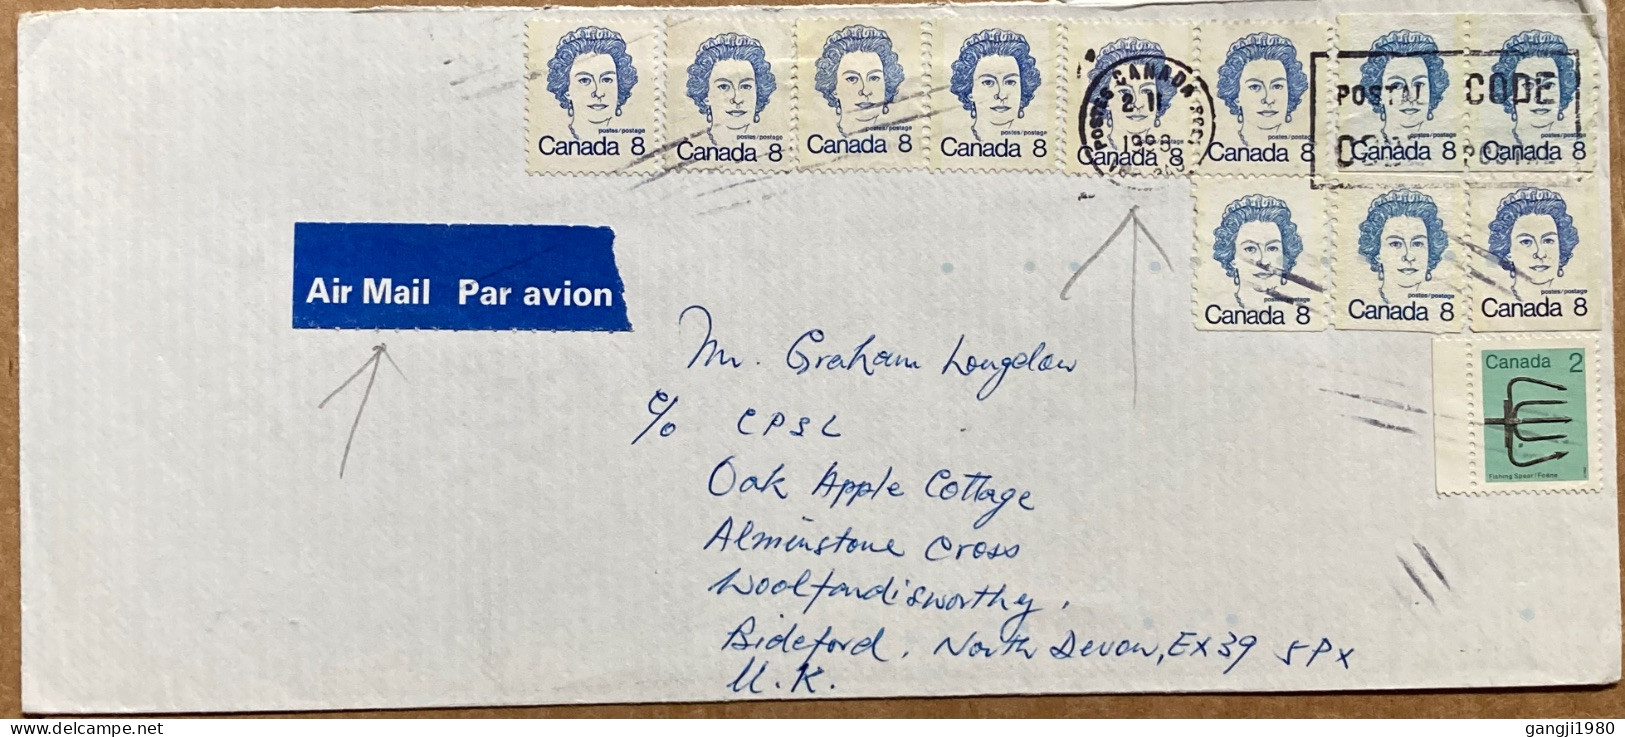 CANADA 1988, COVER USED TO ENGLAND, MULTI 12 STAMP, QUEEN & FISHING SPEAR, POST CODE, MACHINE SLOGAN CANCEL. - Brieven En Documenten